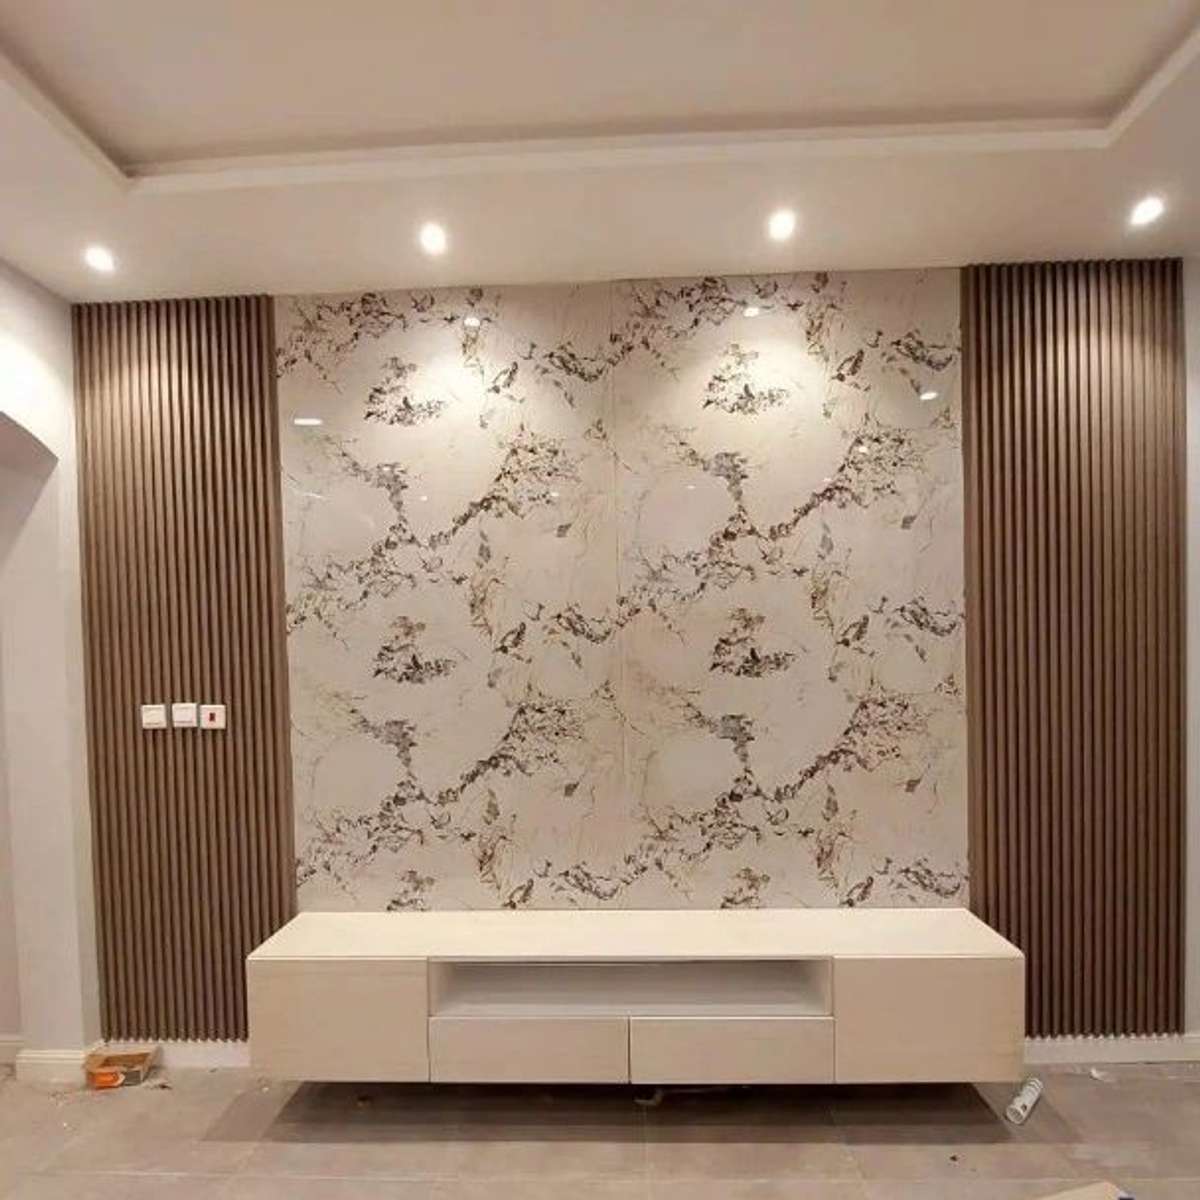 Designs by Contractor Sahil Mittal, Jaipur | Kolo